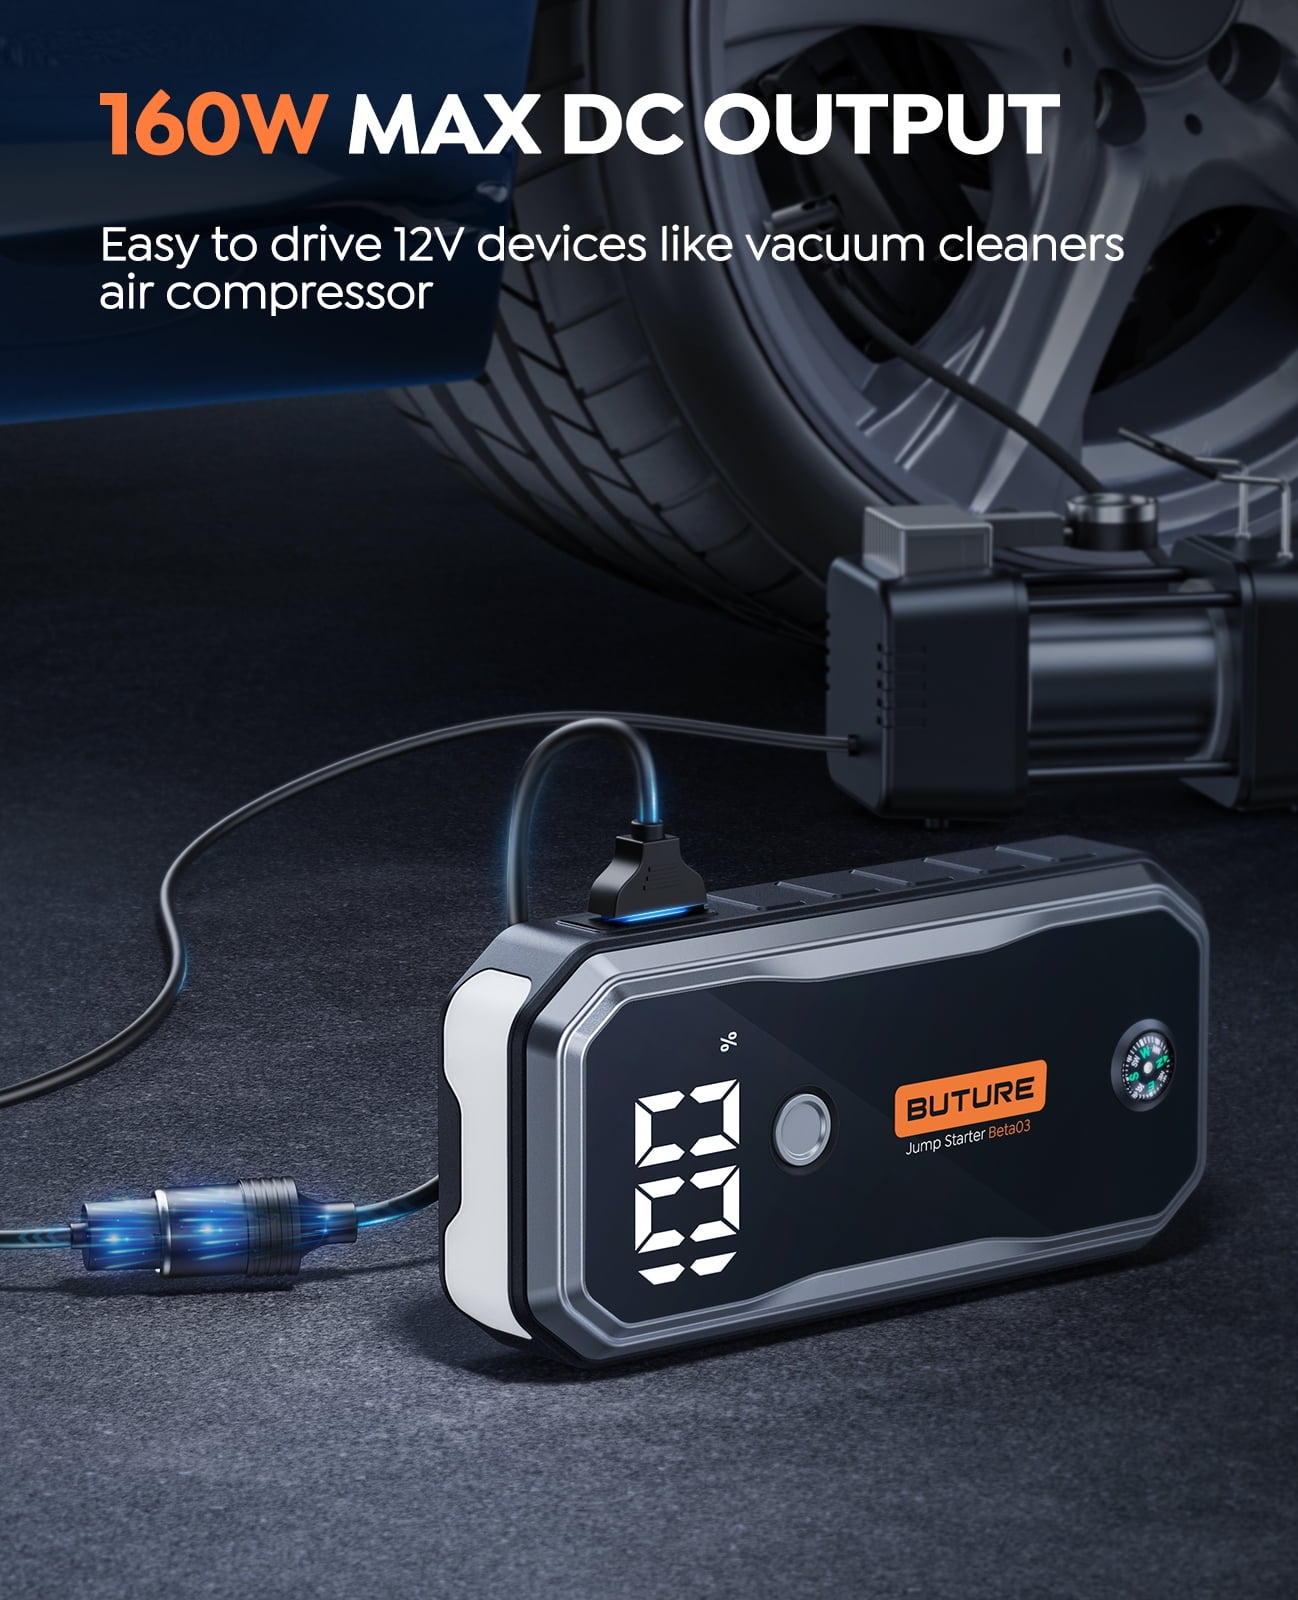 Car Jump Starter 4000A 23800mAh Auto Booster(All Gas or 8.0L Diesel)  Wireless Charger YABER 